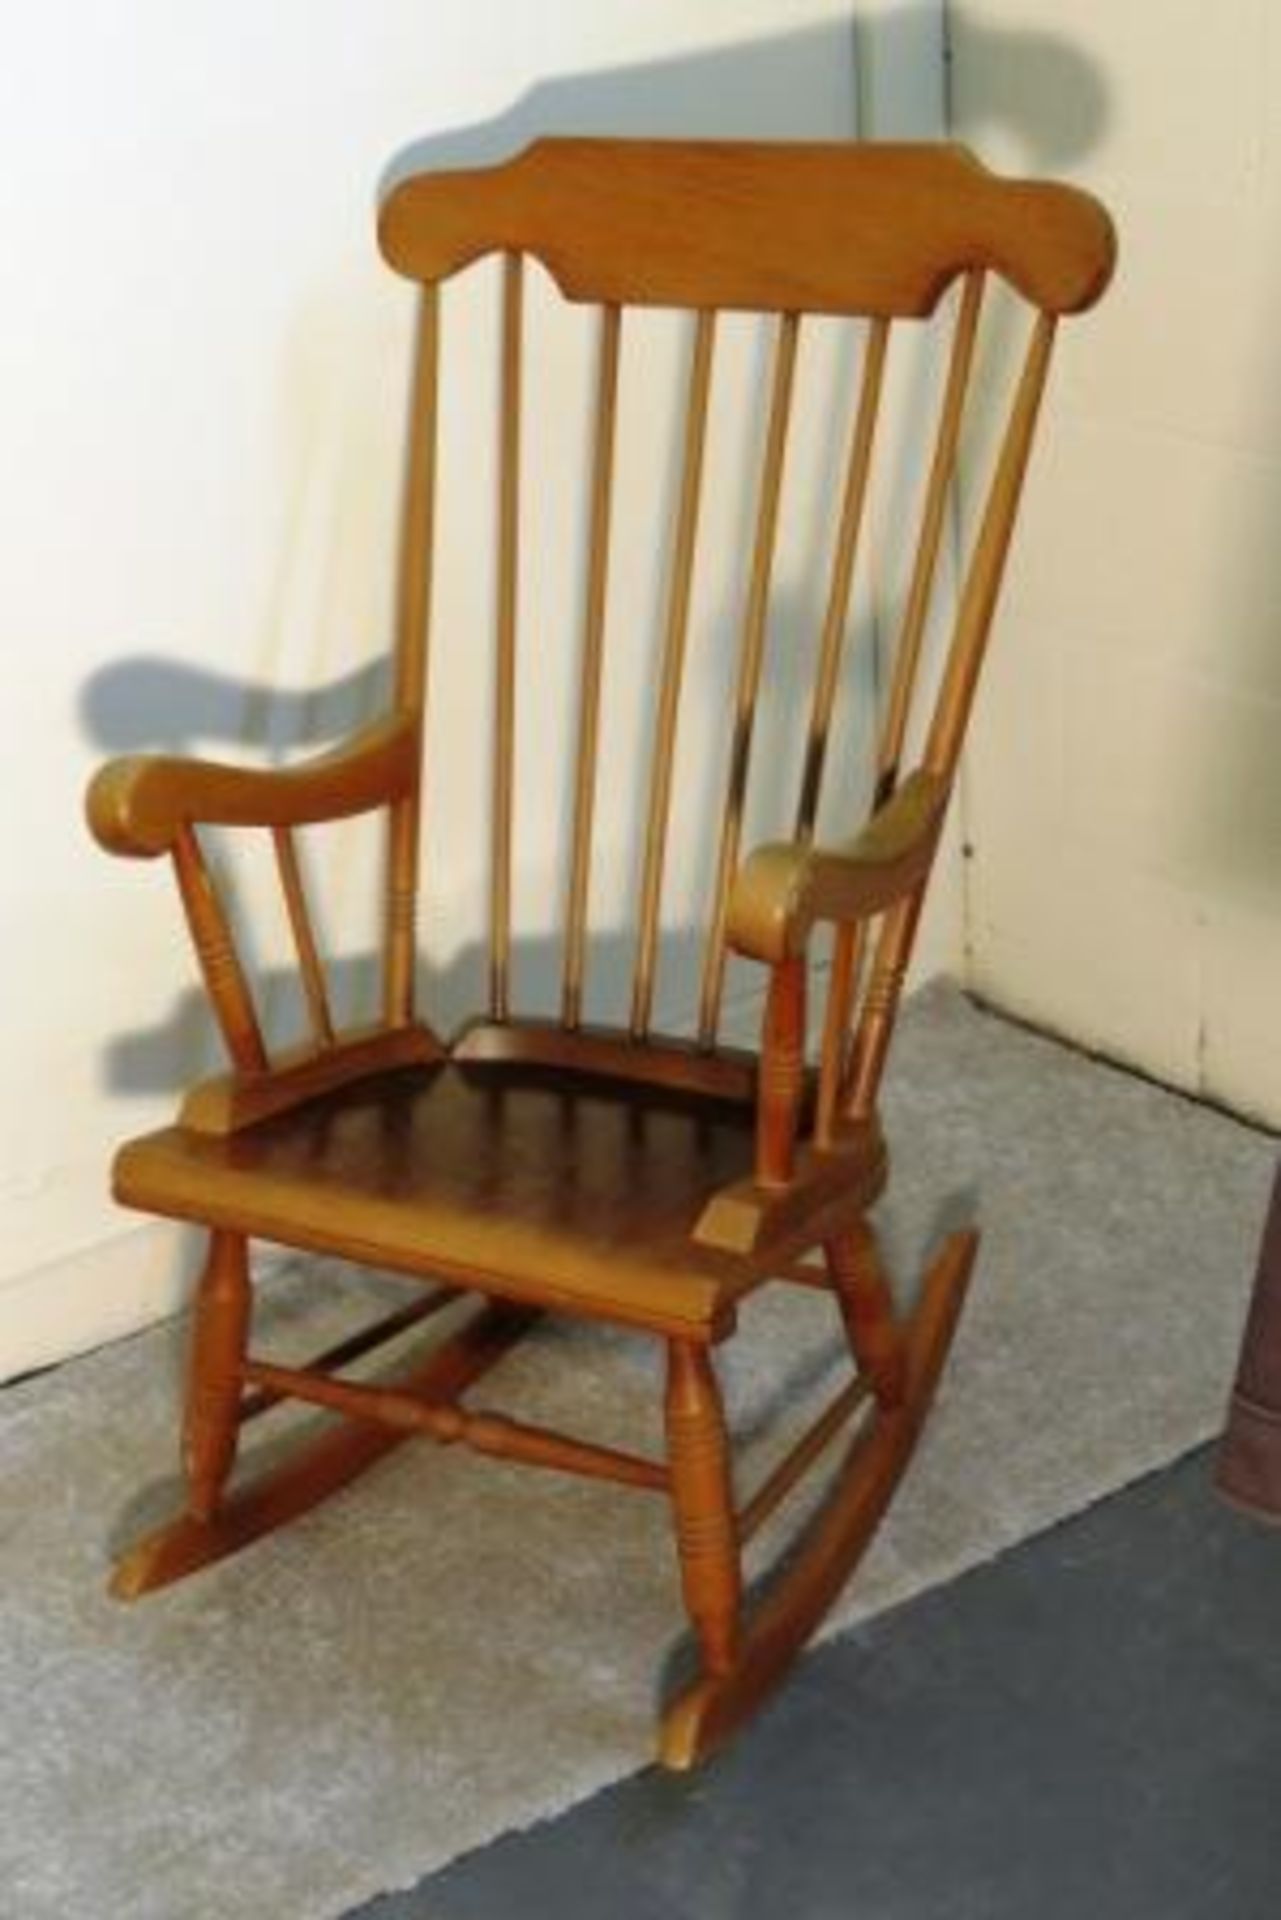 VINTAGE PINE ROCKING CHAIR - HIGH BACK SPINDLE - EXCELLENT CONDITION